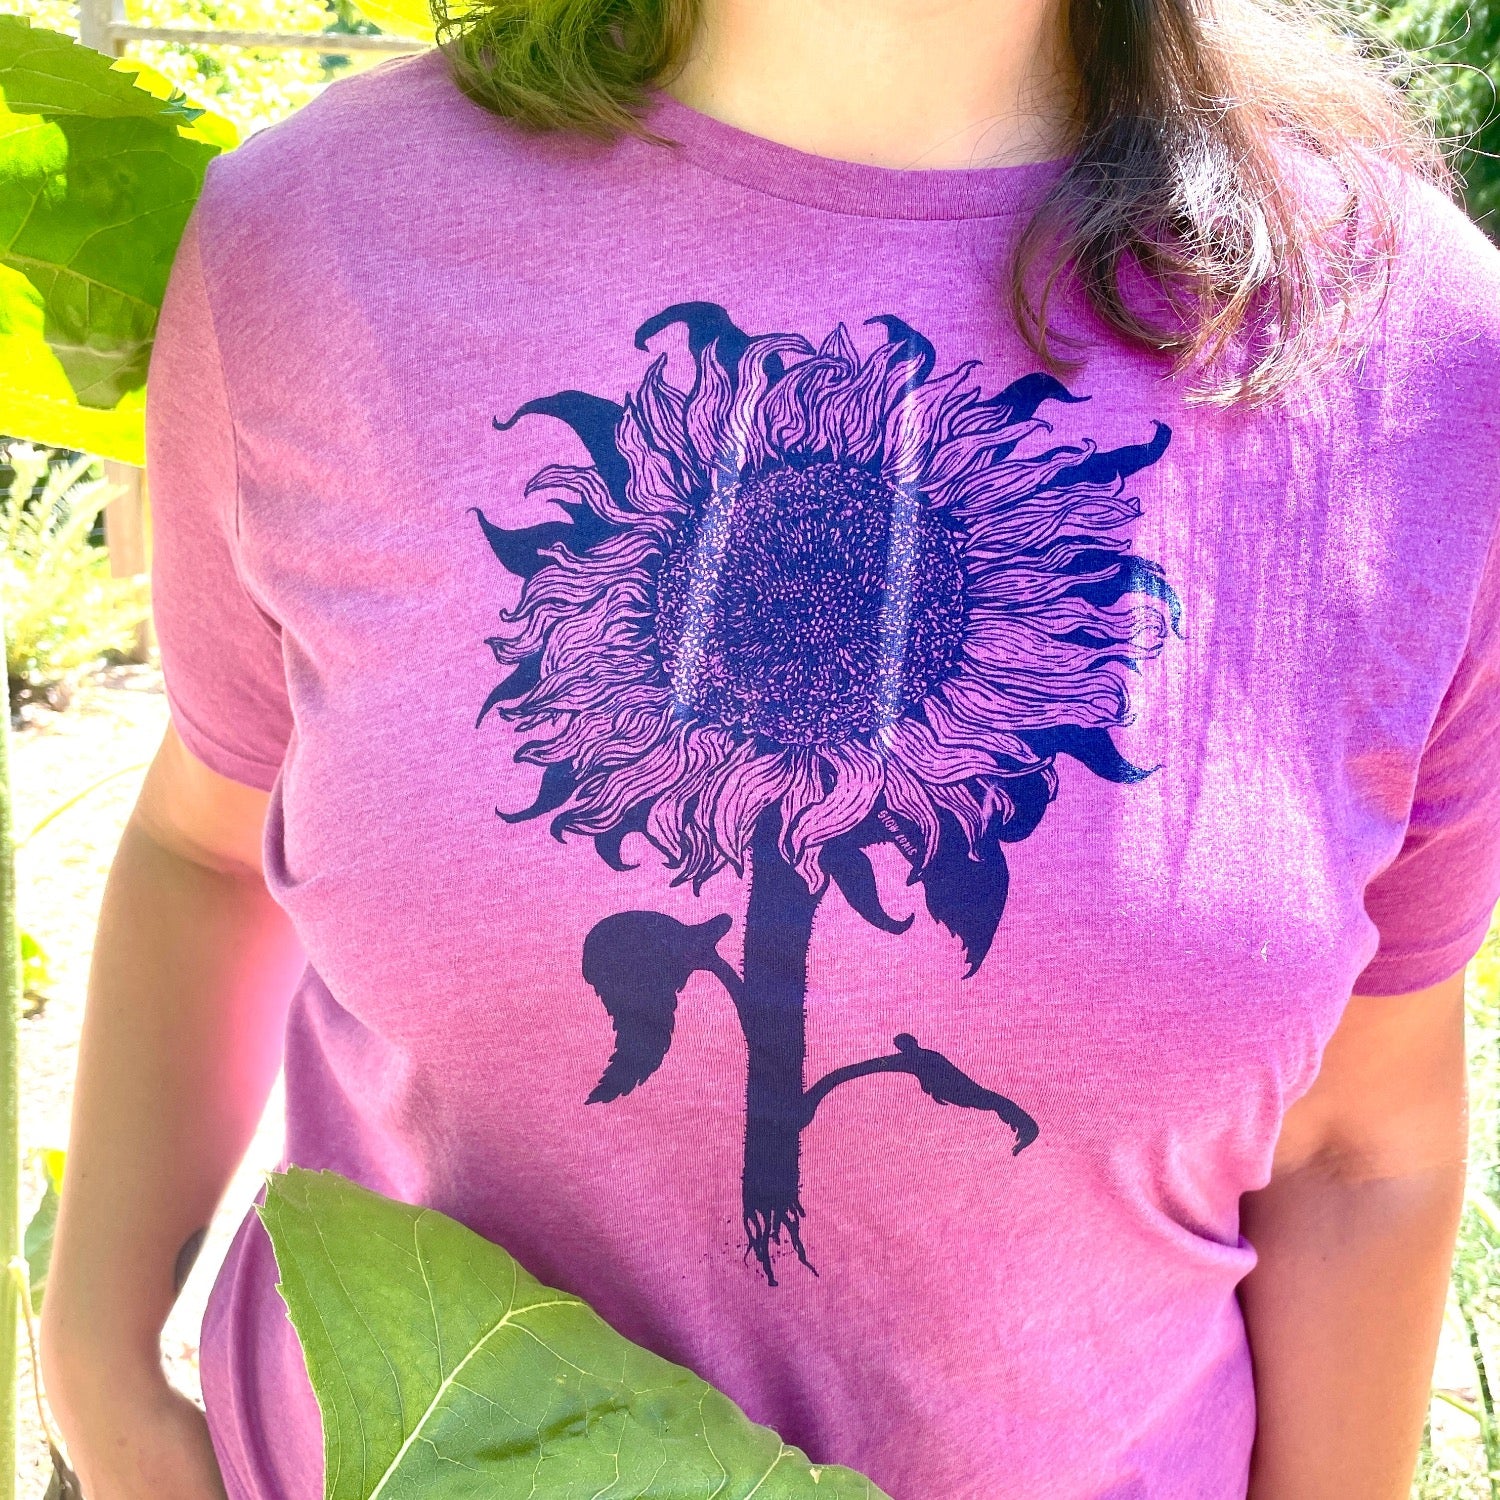 Woman wearing purple tinted pink shirt with a sunflower printed in 